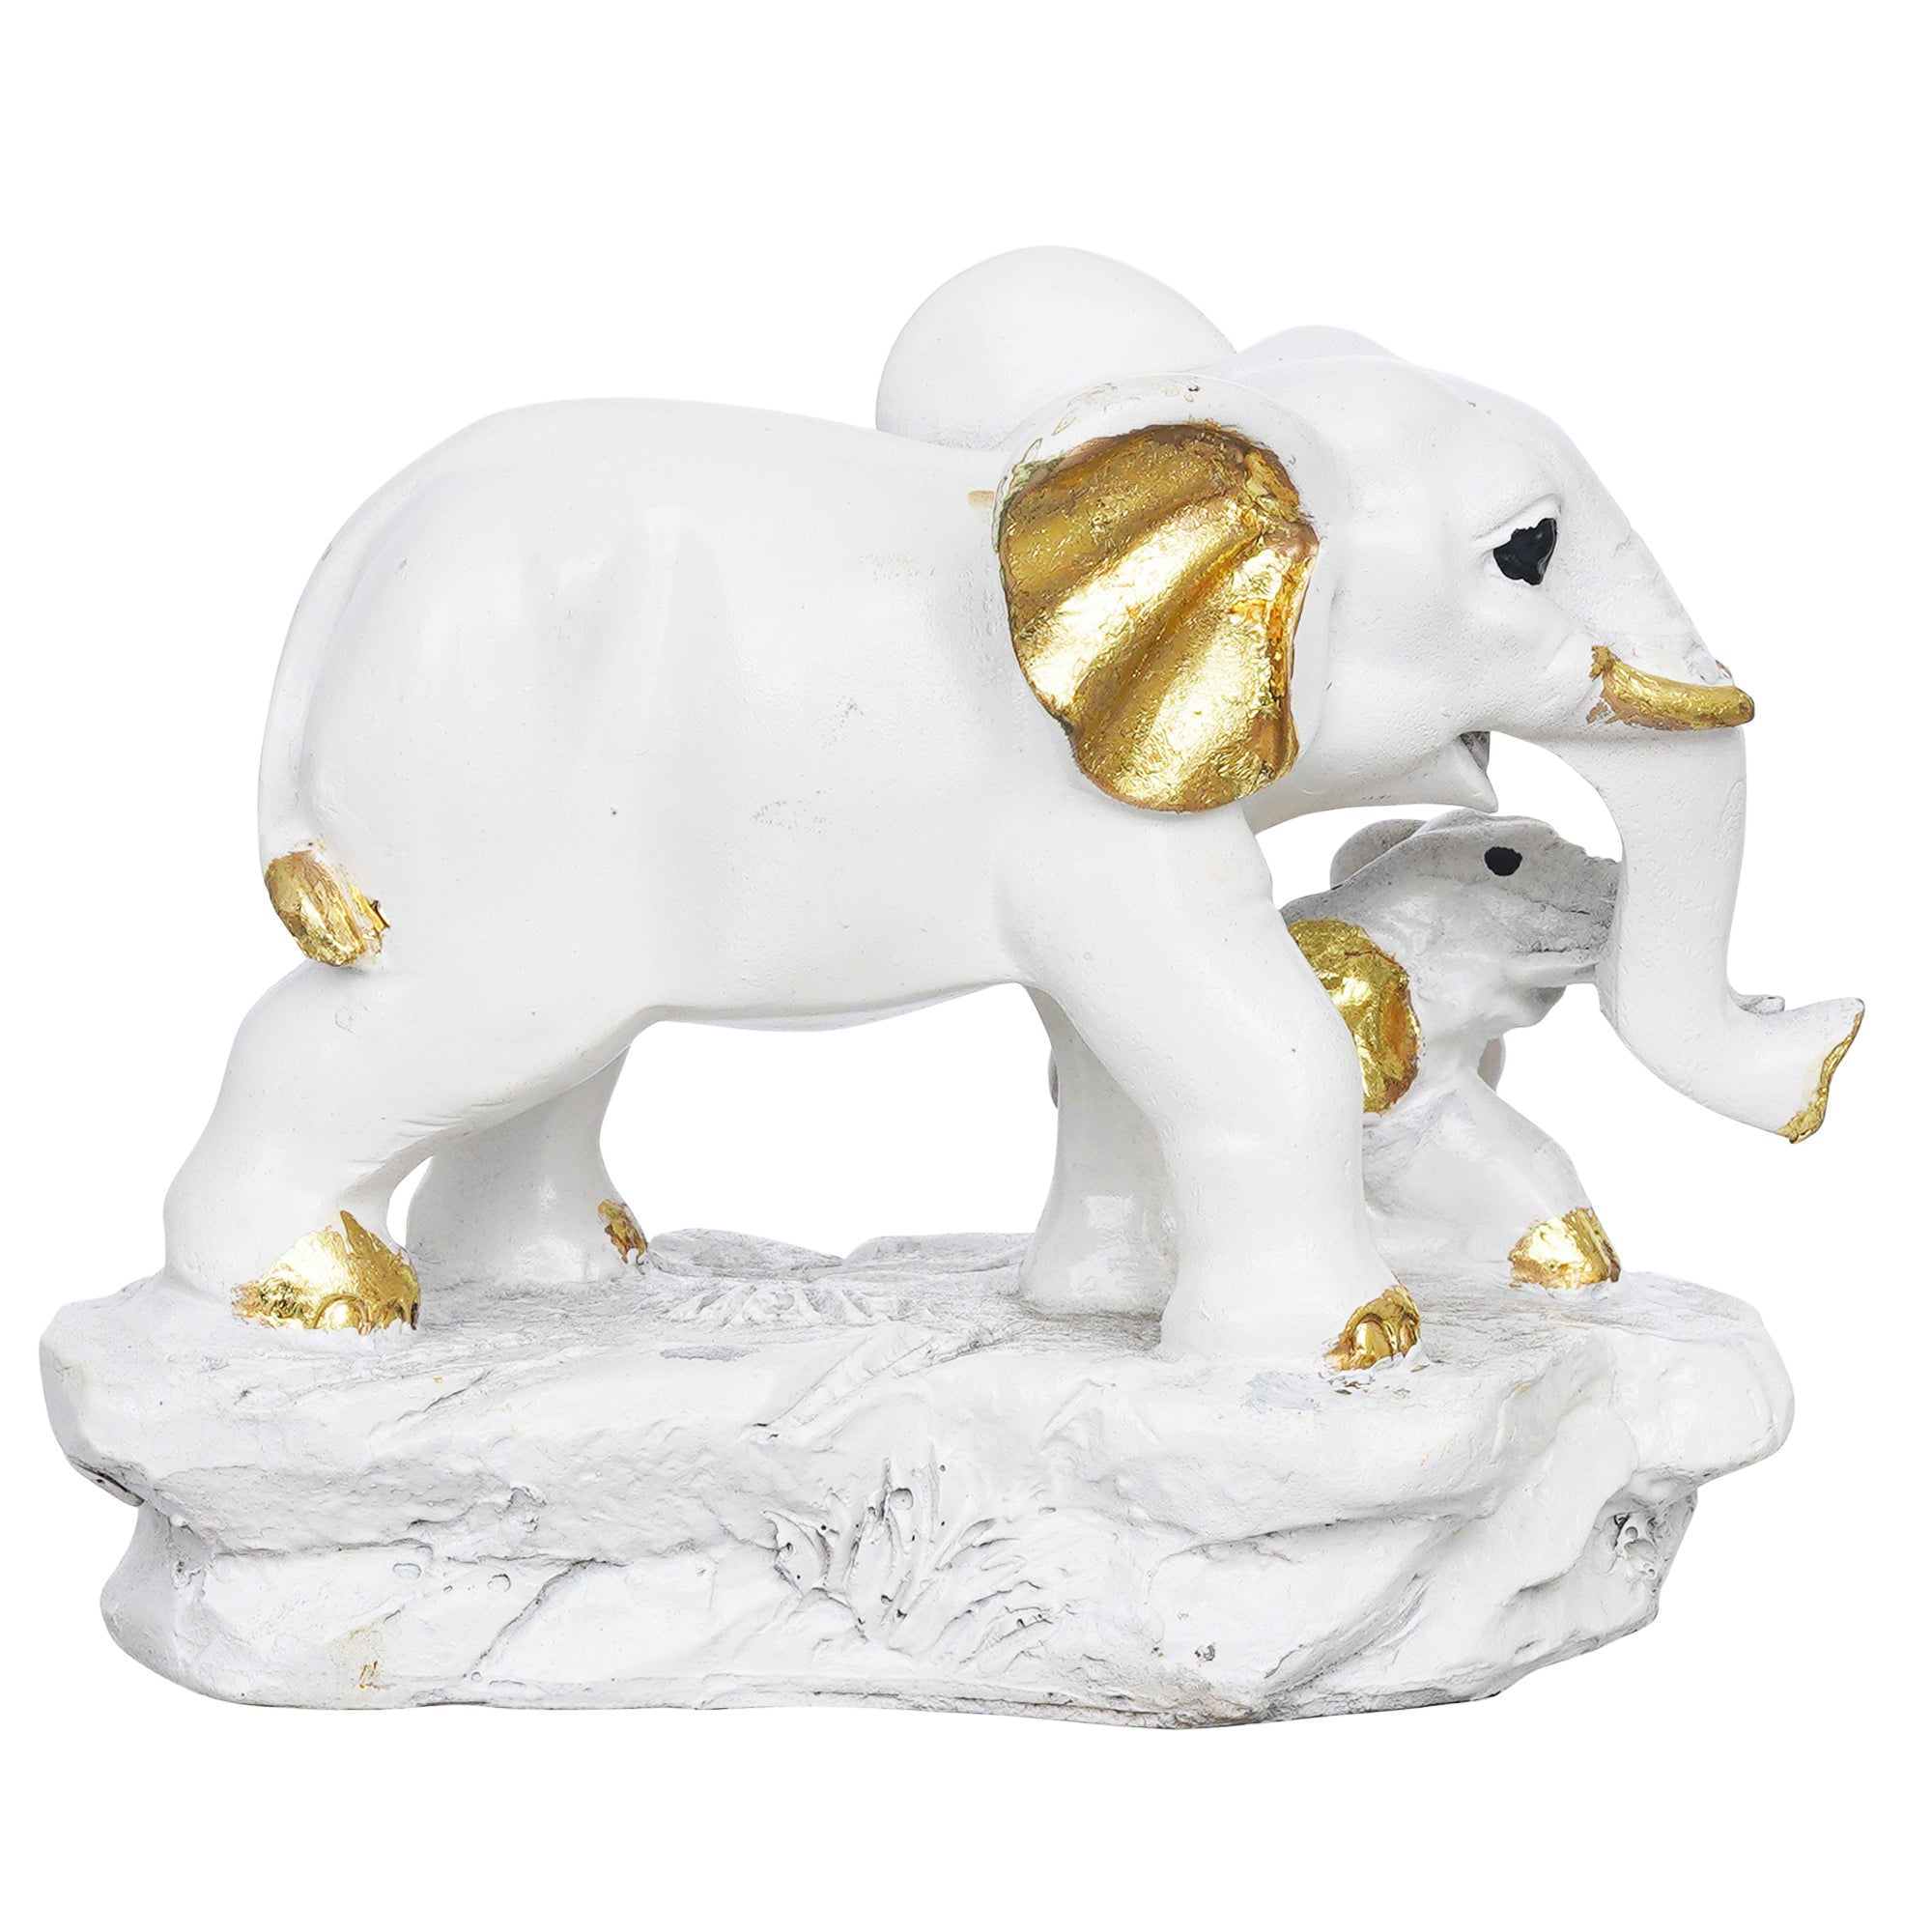 eCraftIndia White and Golden Cute Elephant with Baby Elephant Statues Animal Figurines Decorative Showpieces for Home Decor 6